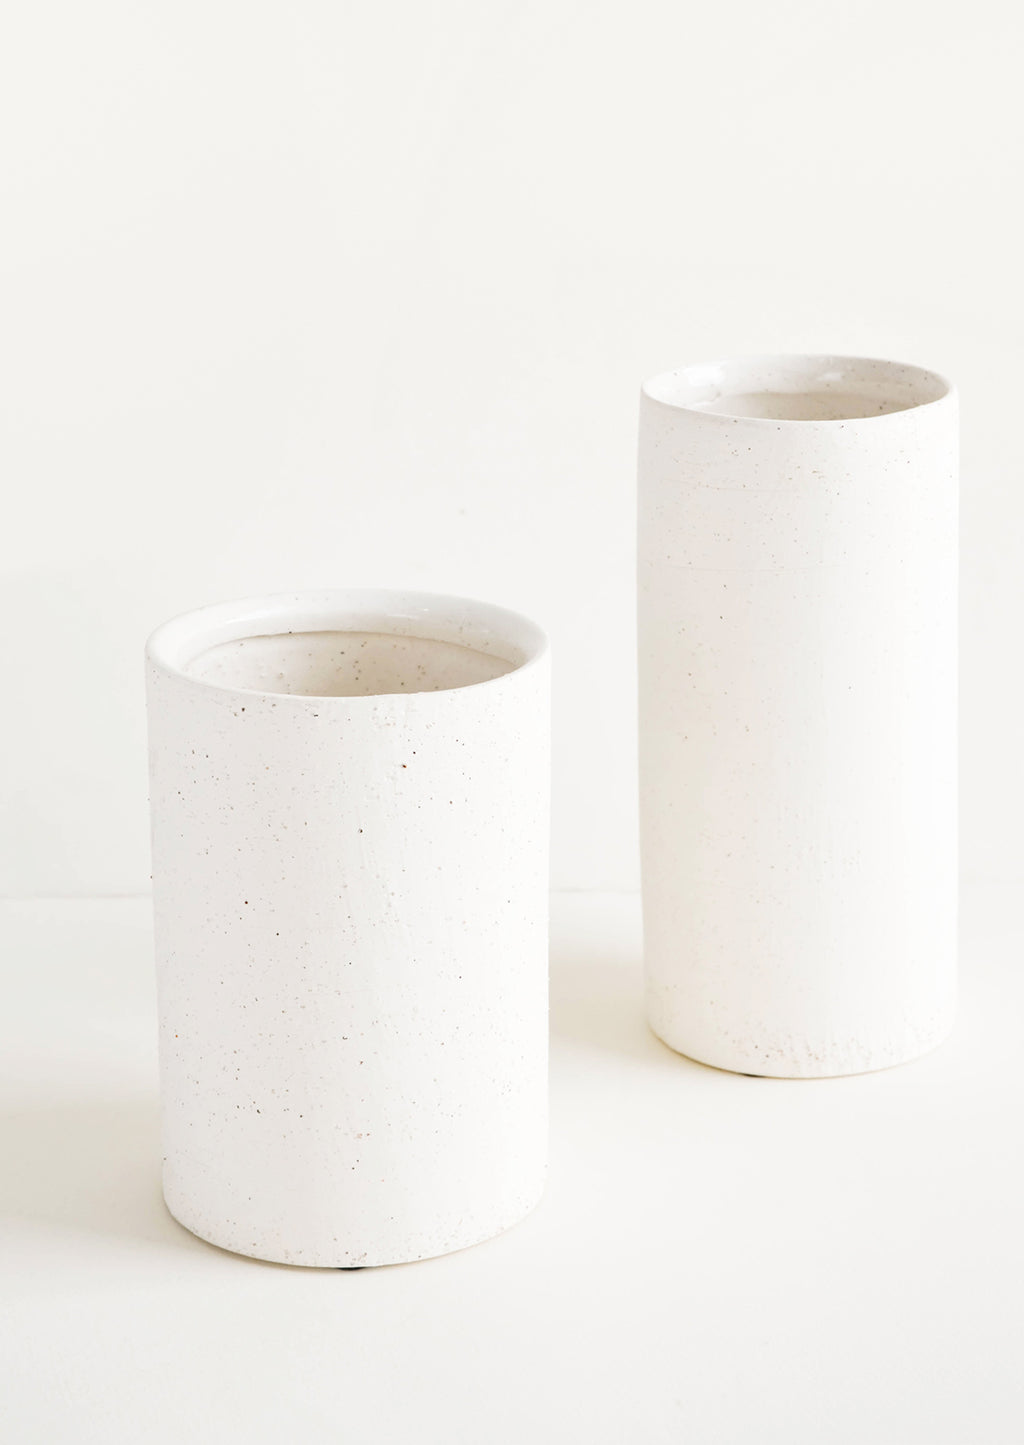 4: Vases made from white, textured concrete-like material in two different sizes, short and tall